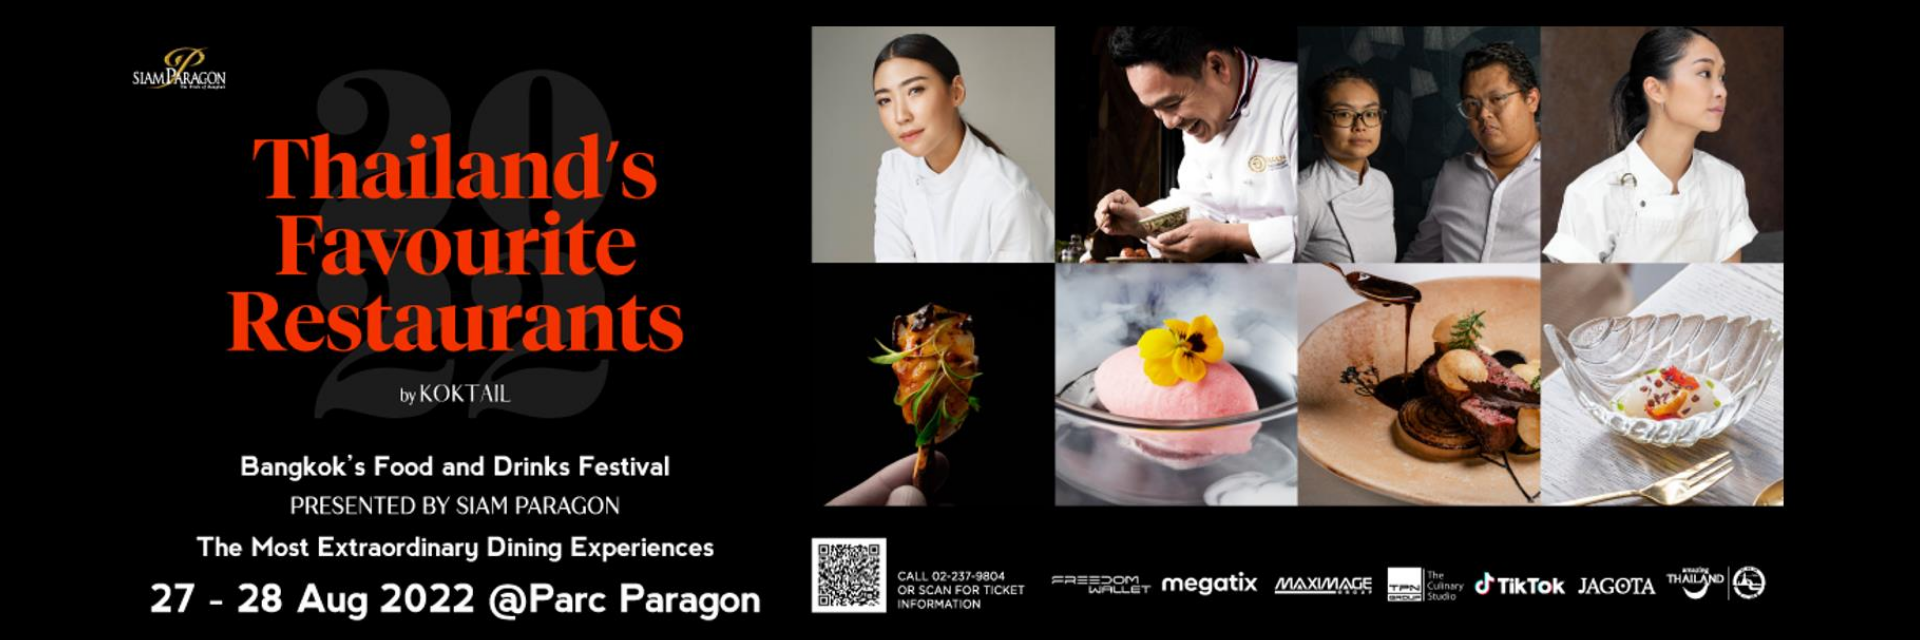 The culinary event of the year “Thailand’s Favourite Restaurants by Koktail Presented by Siam Paragon” at Parc Paragon in August 2022